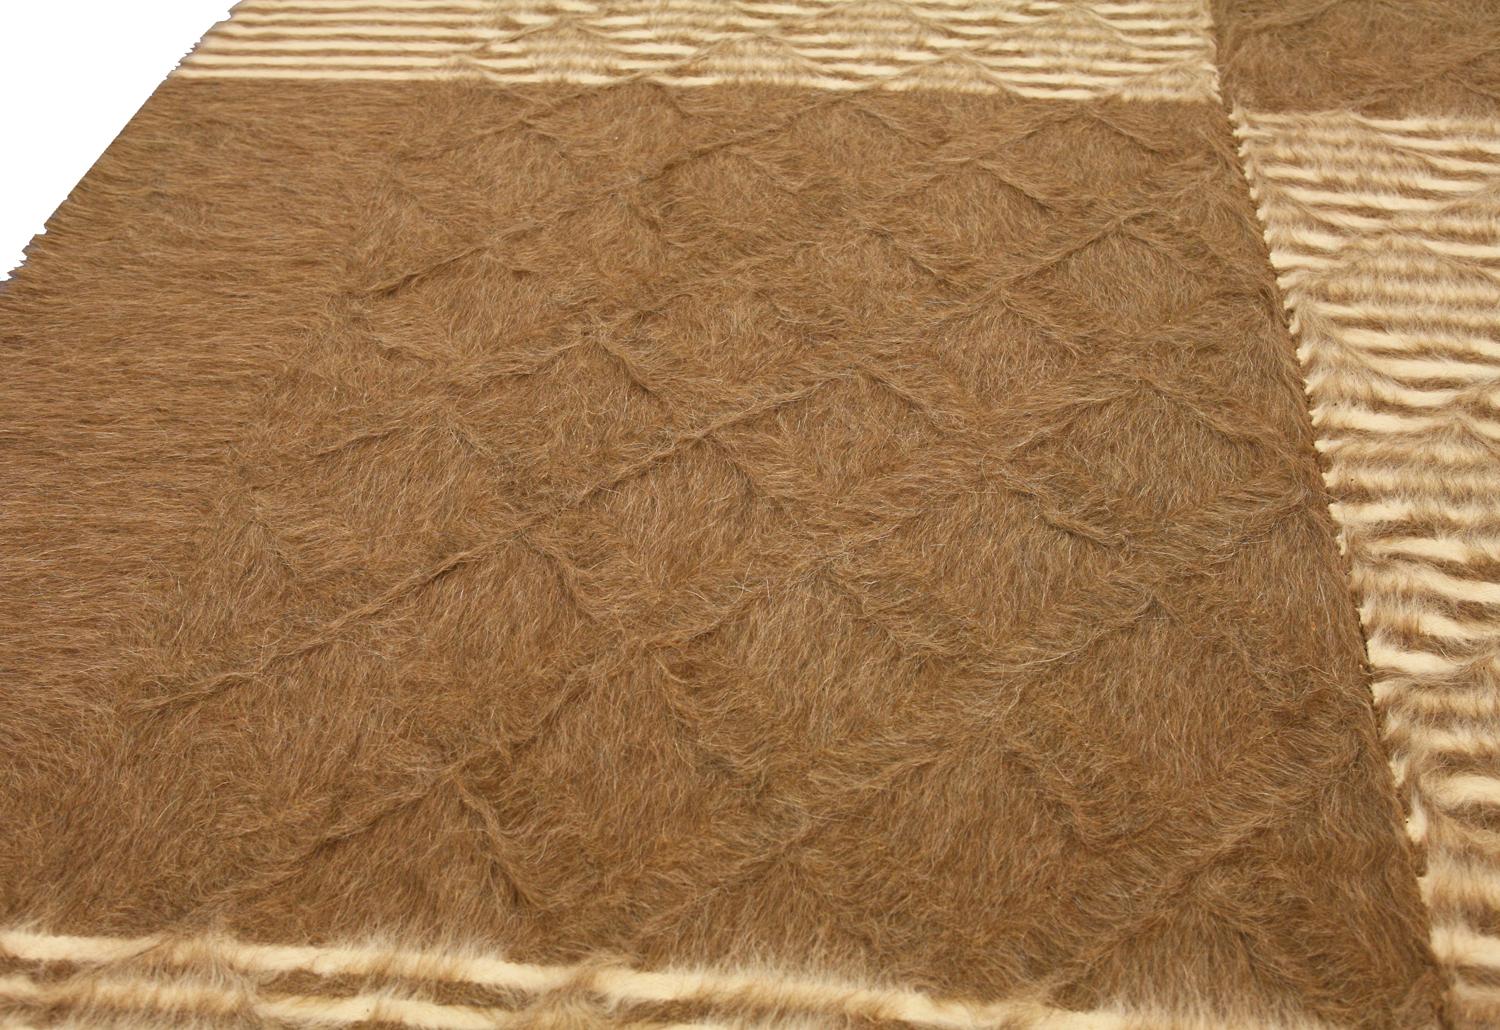 Hand-Knotted Turkish Mohair Brown Wool Carpet, XXI Century For Sale